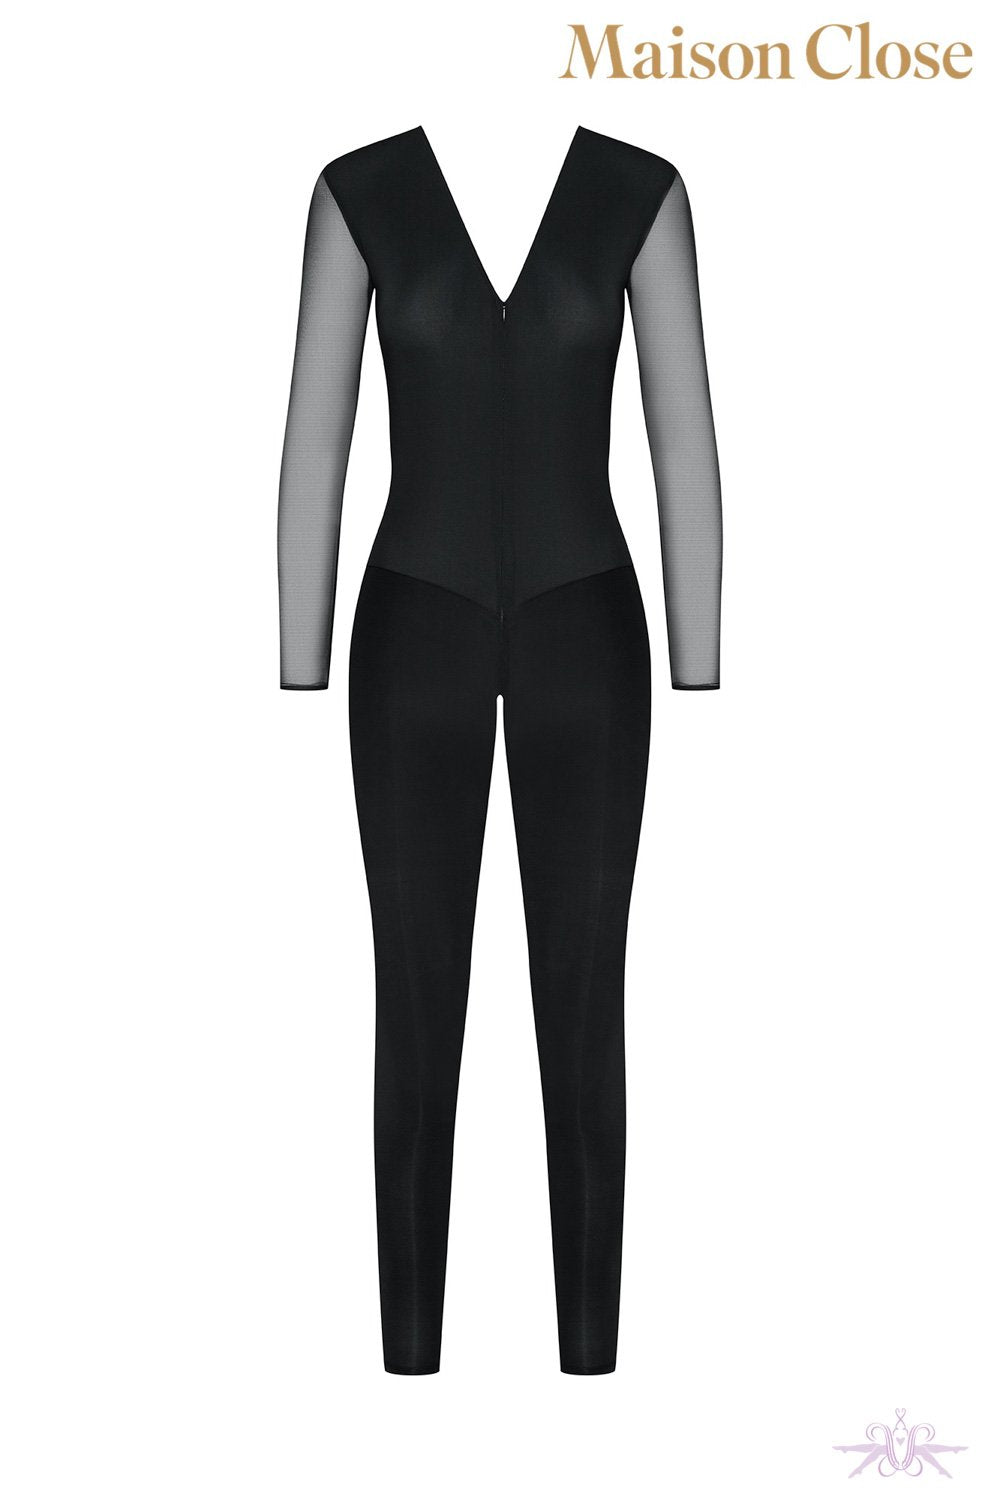 Maison Close Pure Tentation Long Sleeved Black Catsuit at The Hosiery Box